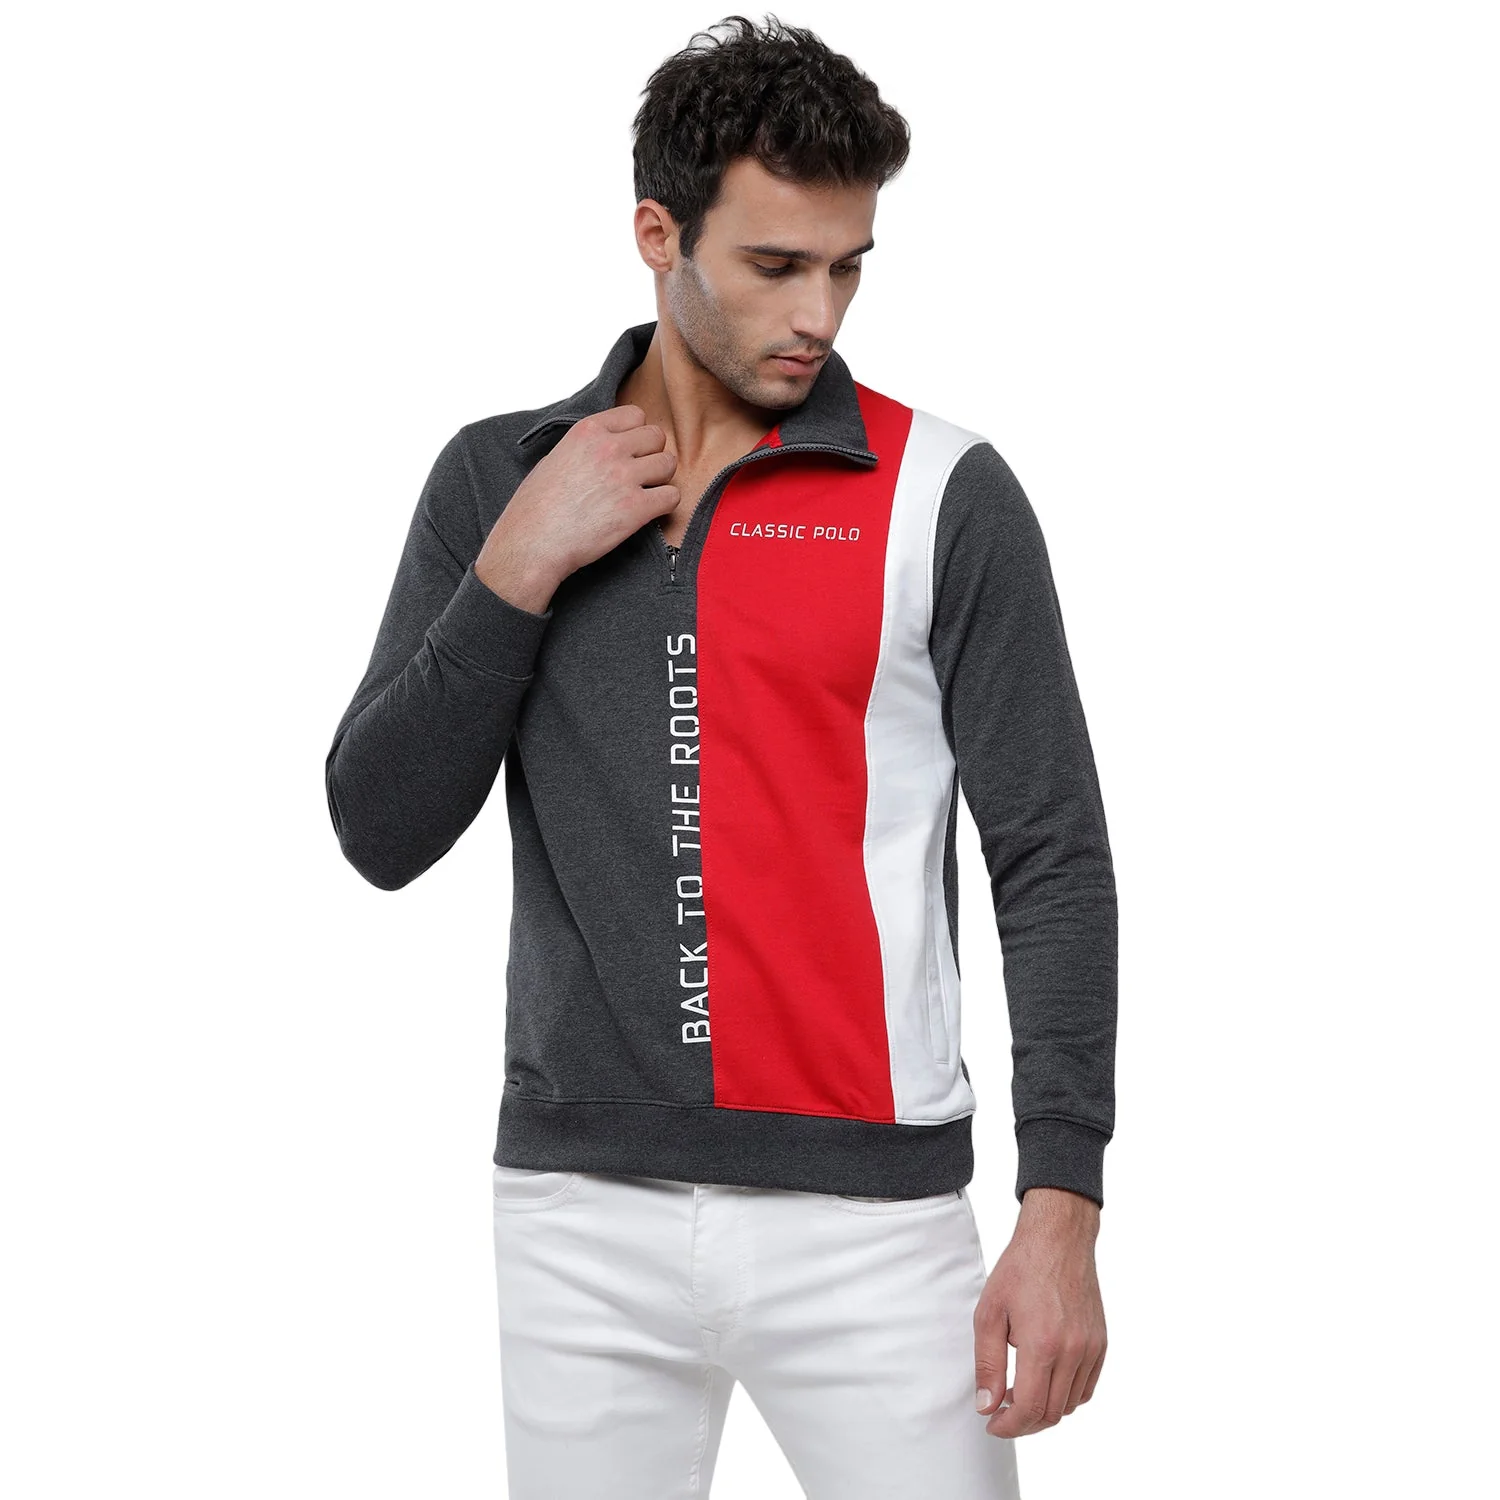 Classic Polo Men's Color Block Full Sleeve Red & Grey Polo Neck Sweat Shirt - CPSS-331A